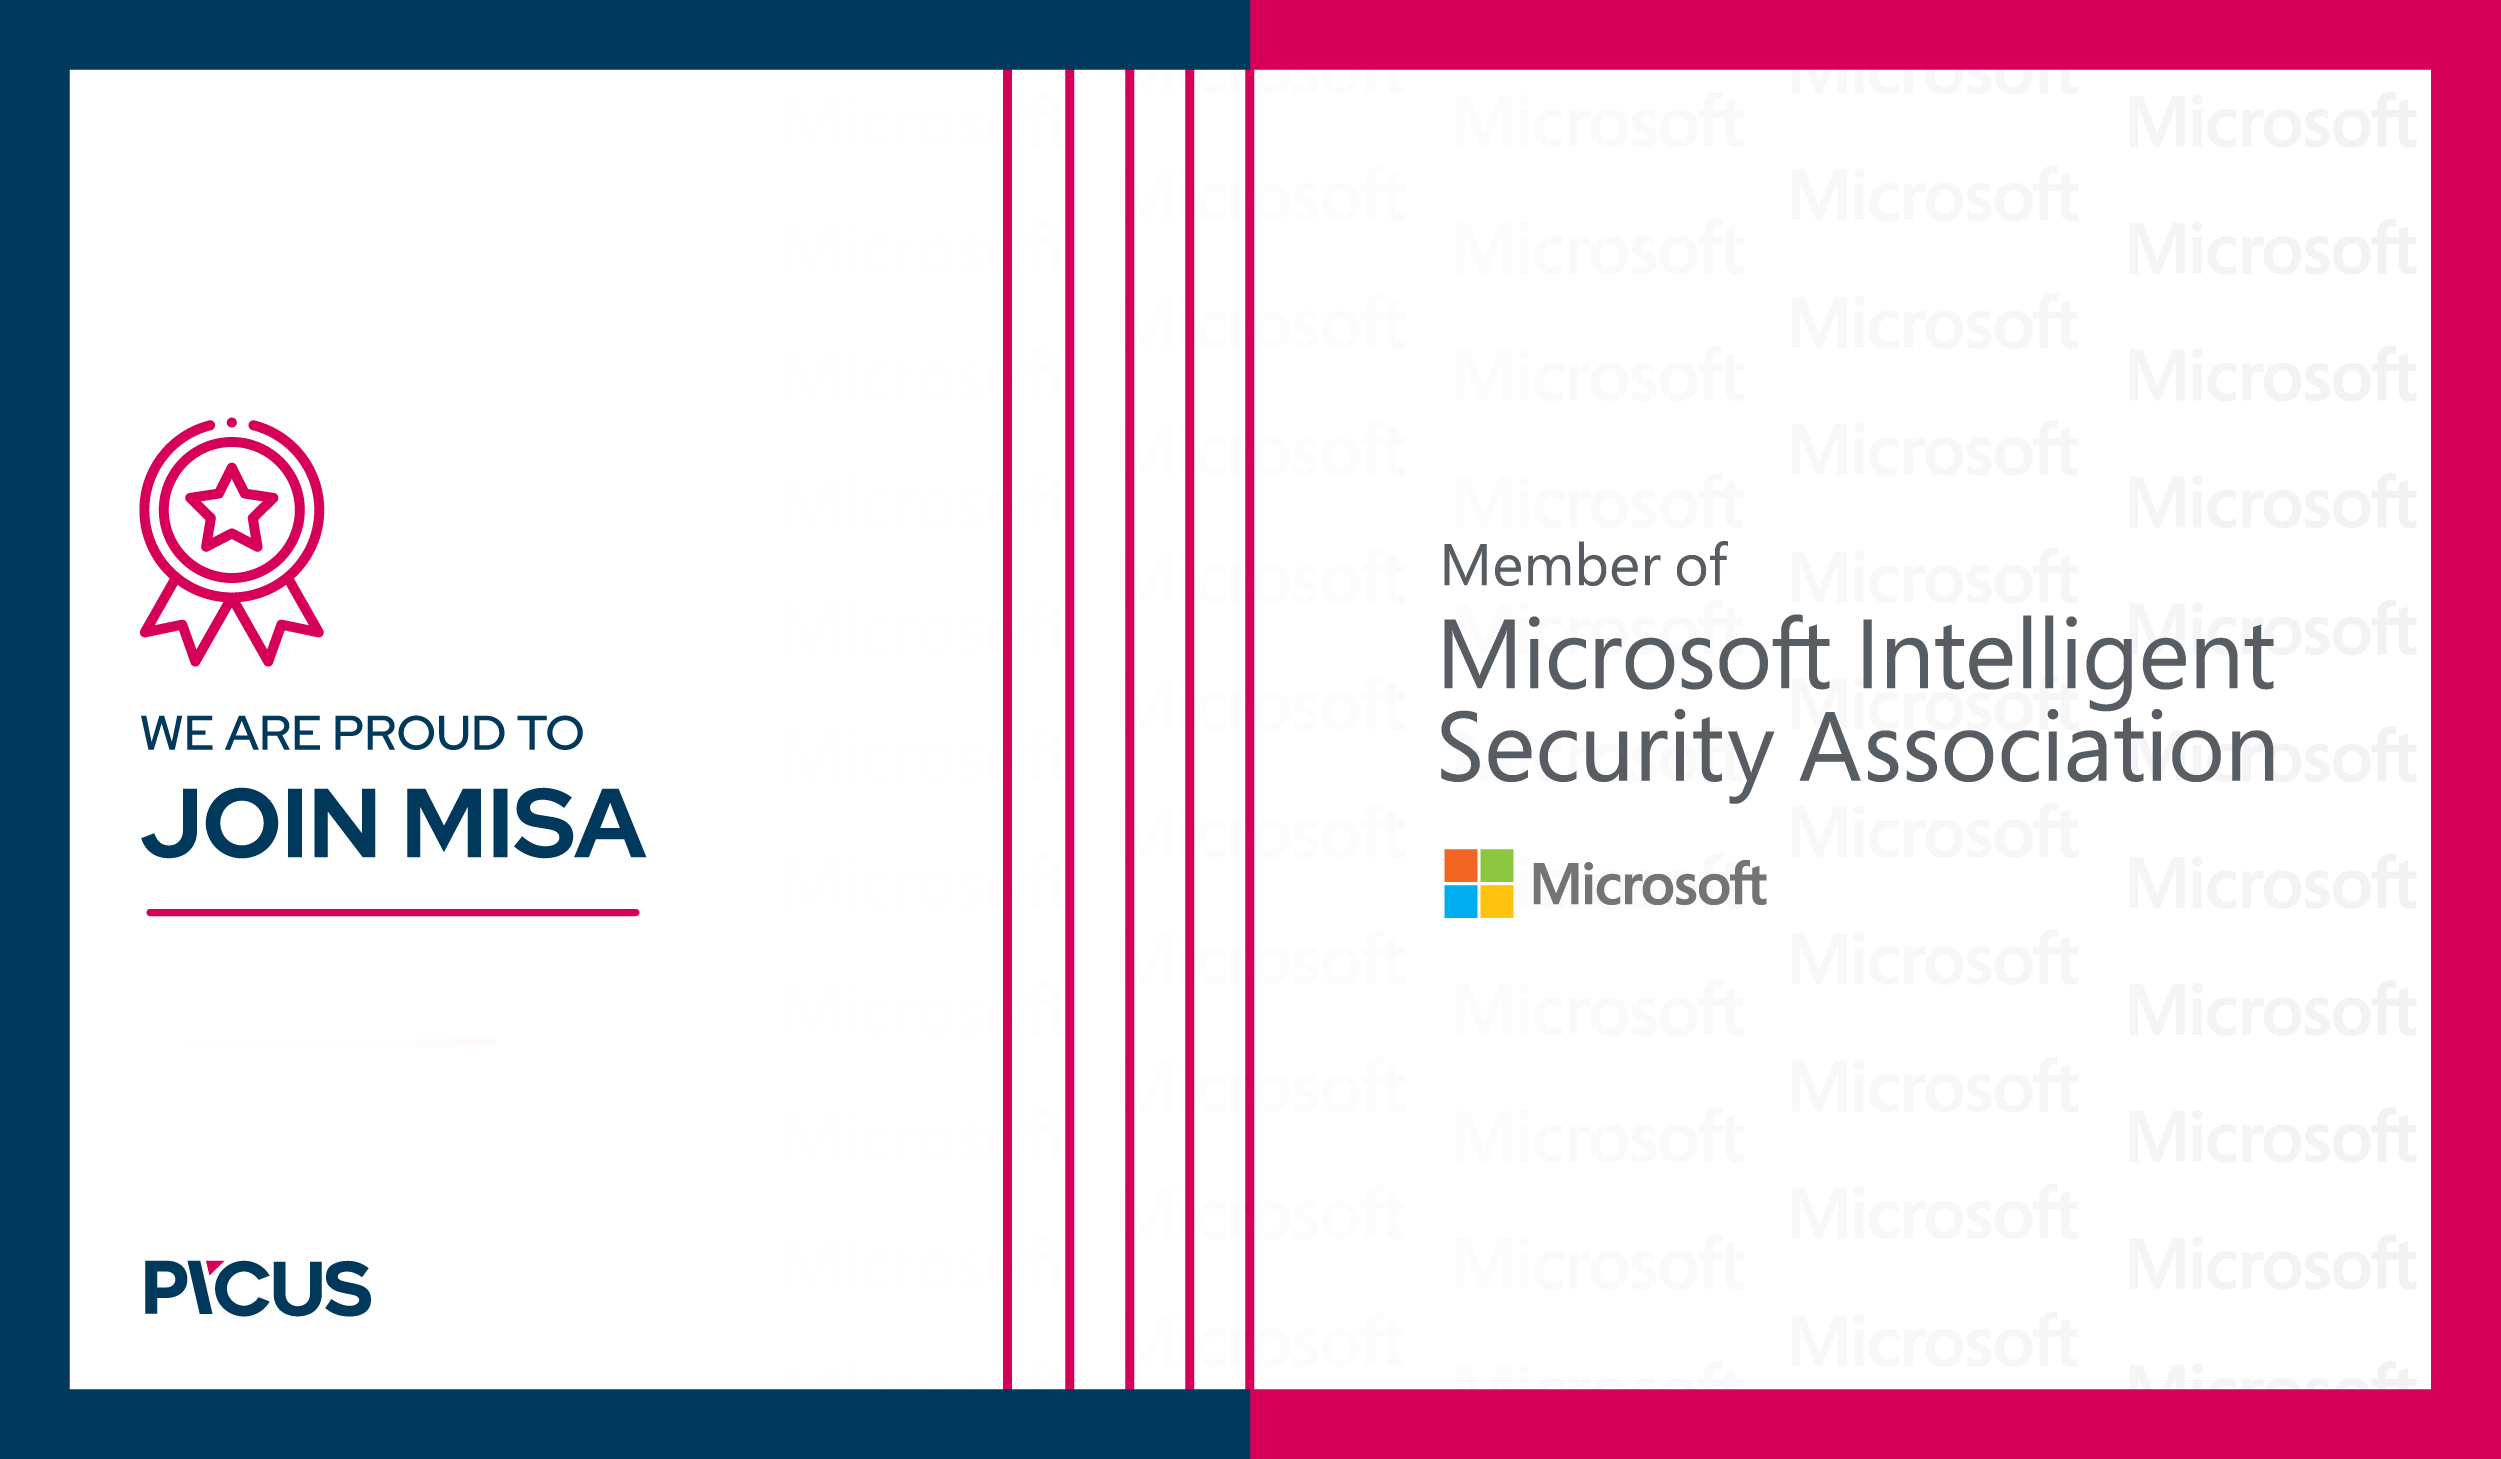 Picus Security Joins Microsoft Intelligent Security Association (MISA)